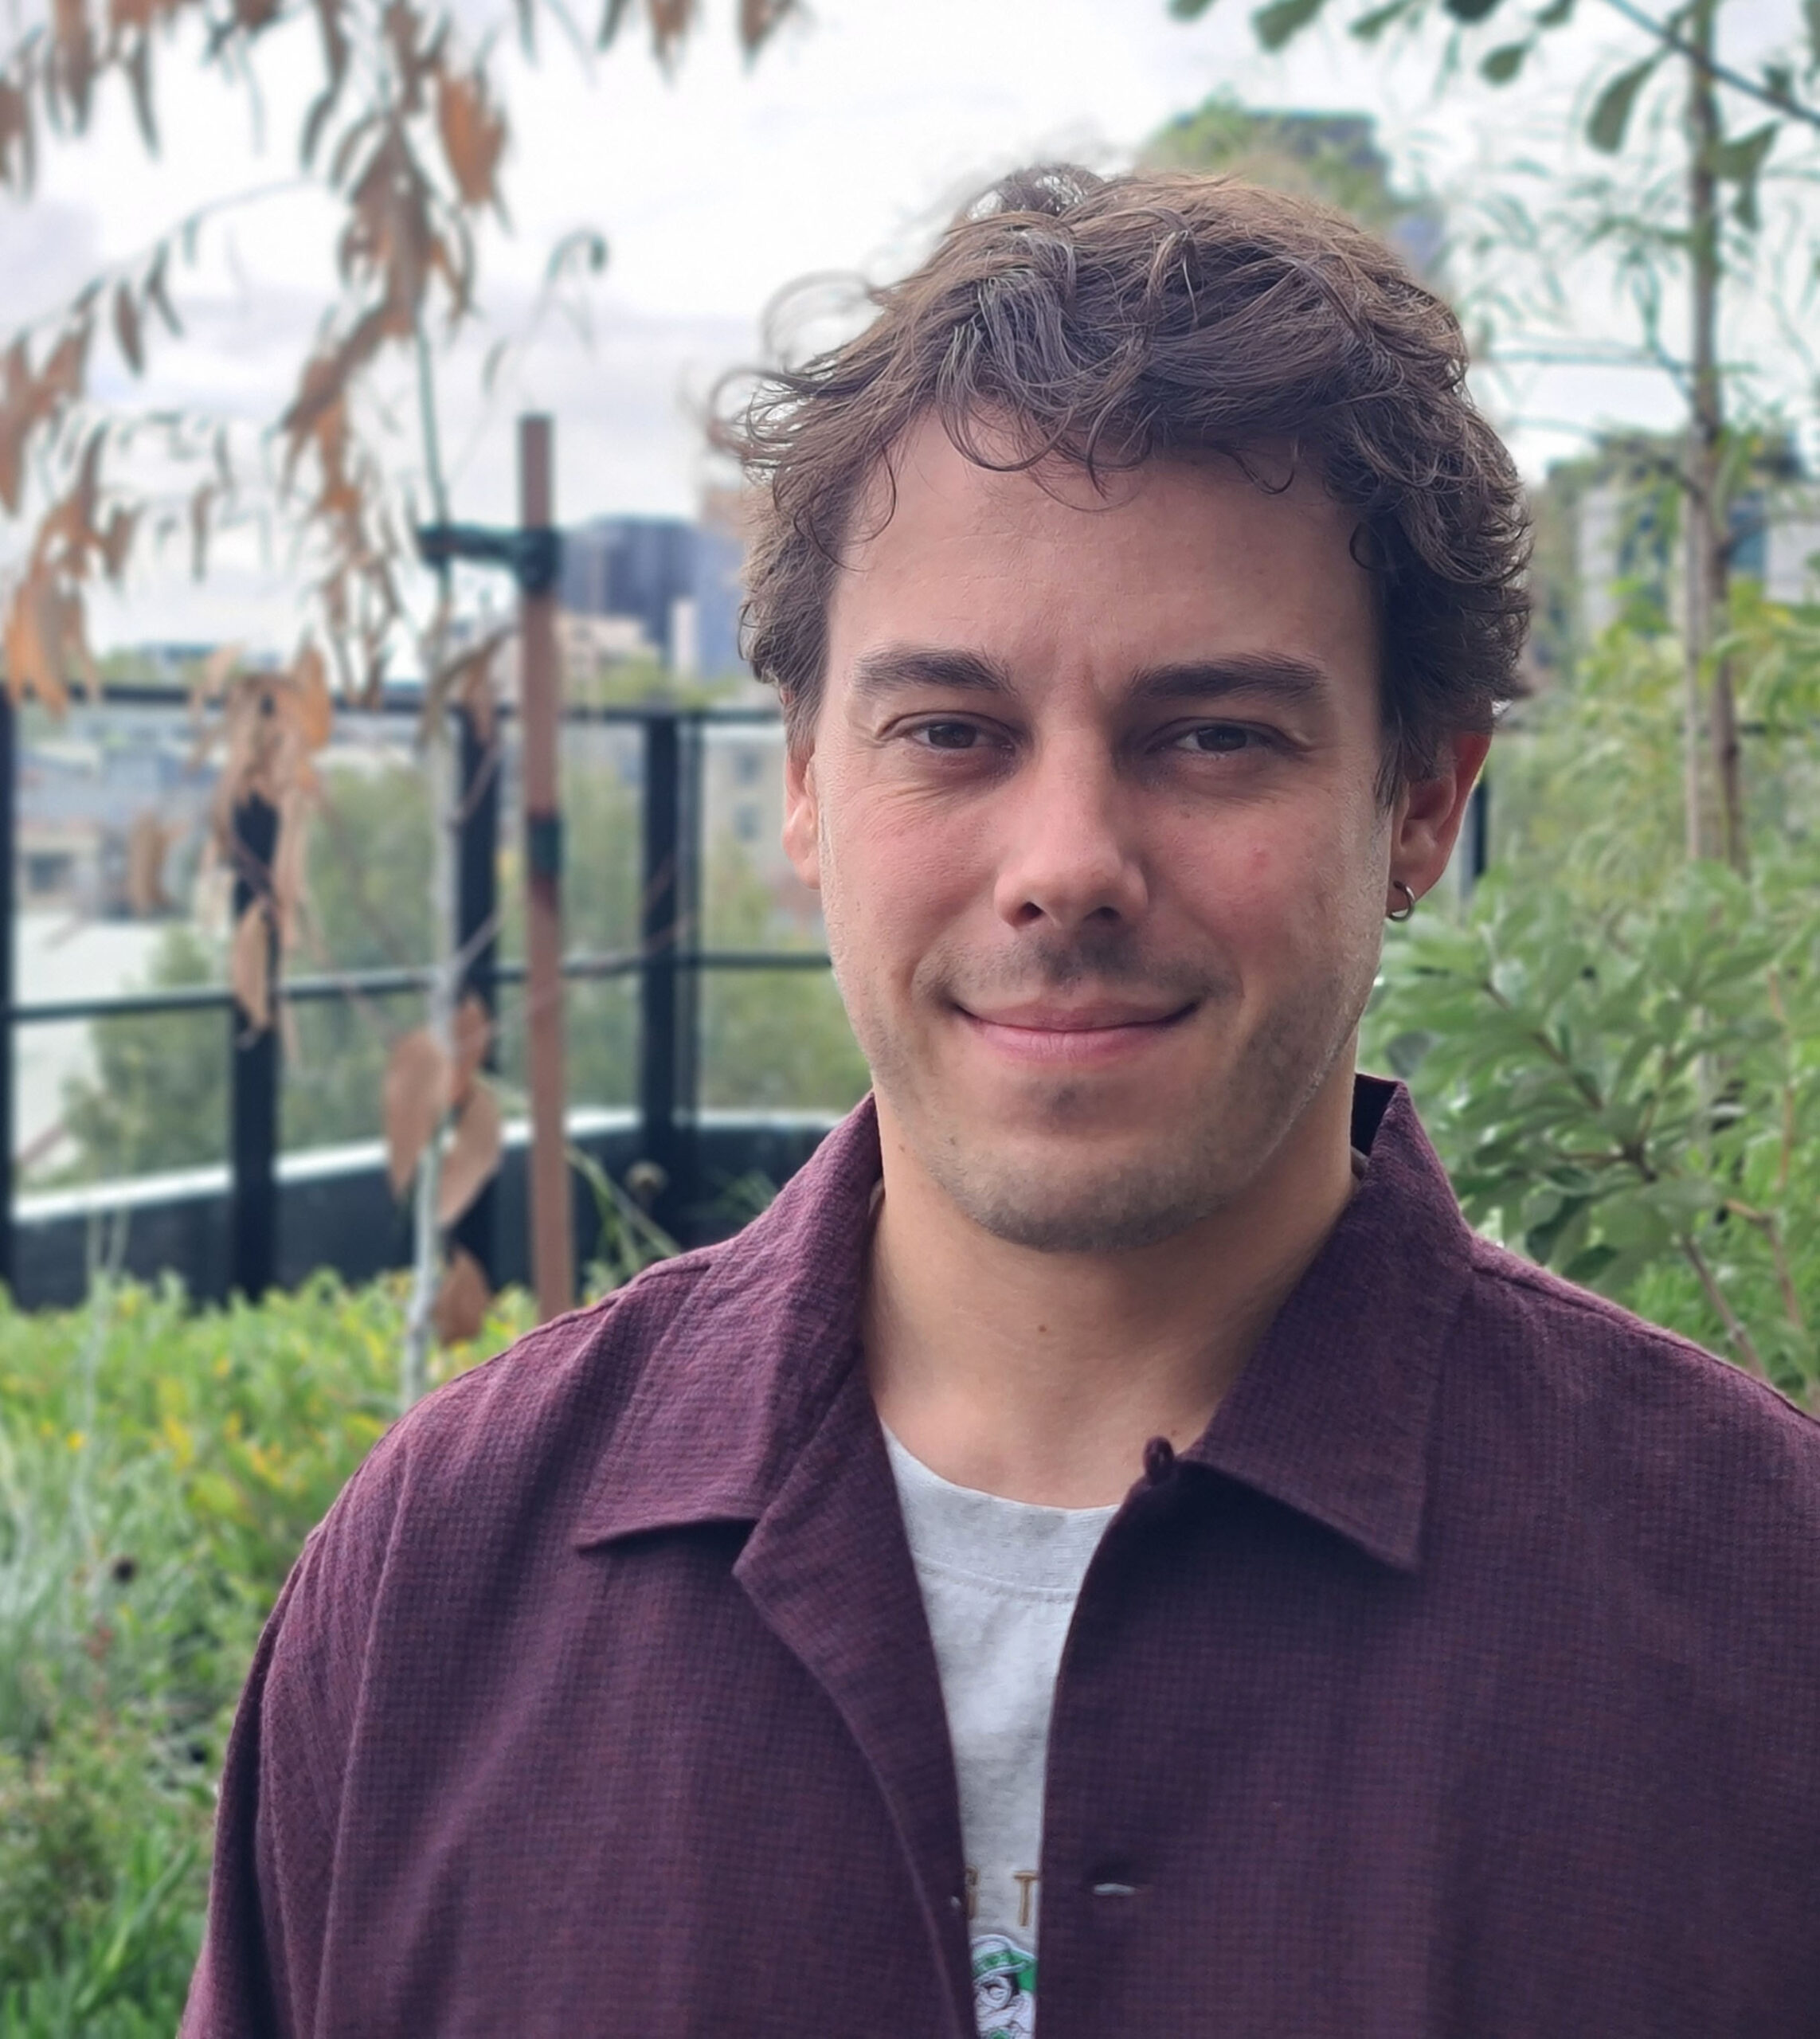 Jacob, a white man, stands before the camera. He is standing in a garden and wearing a maroon button up shirt over a grey tshirt. He has brown hair that is slightly curly.